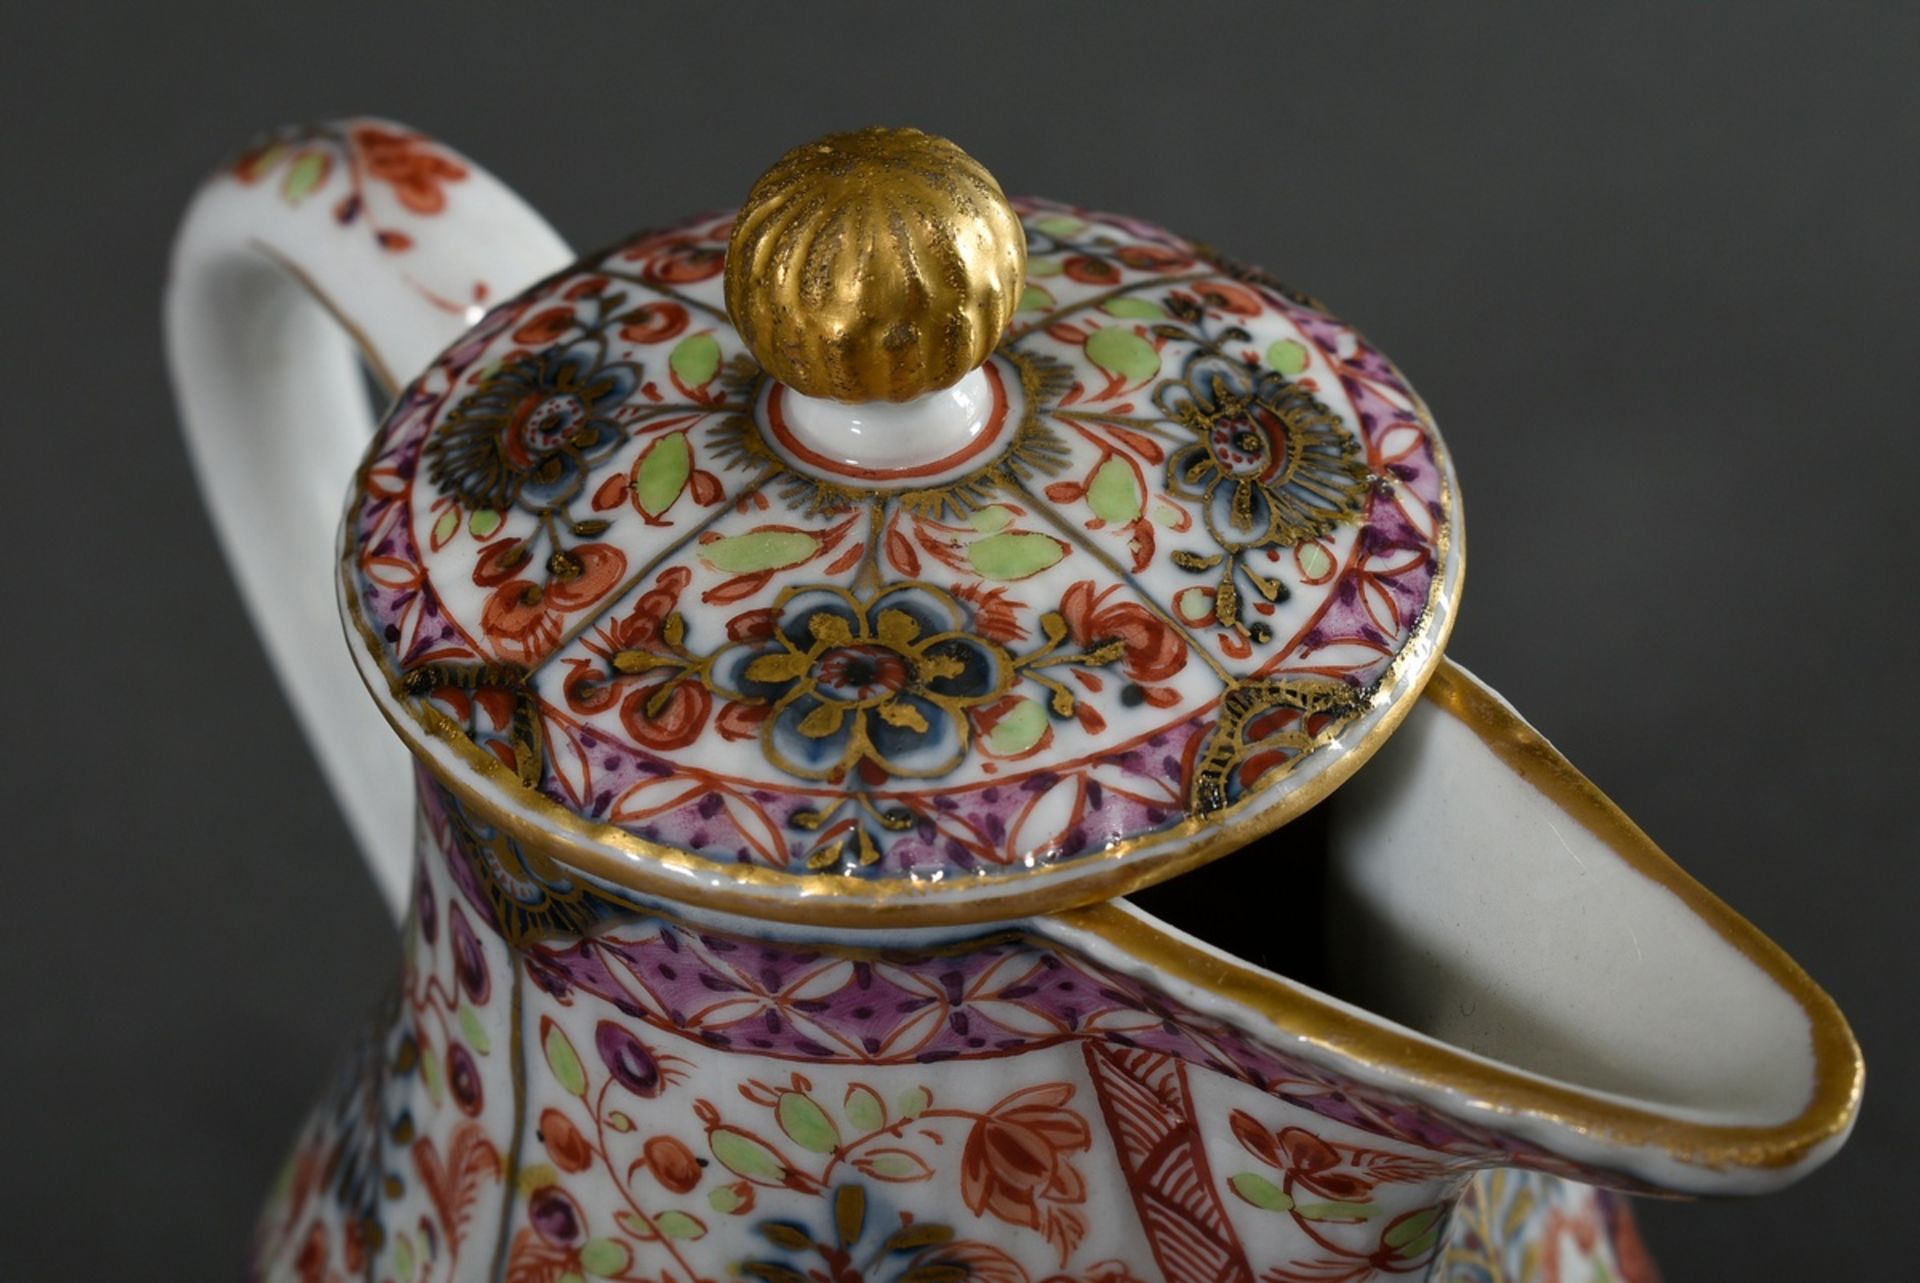 Small antique Meissen coffee-pot with opulent polychrome decoration "Indian Flower Painting" over b - Image 3 of 5